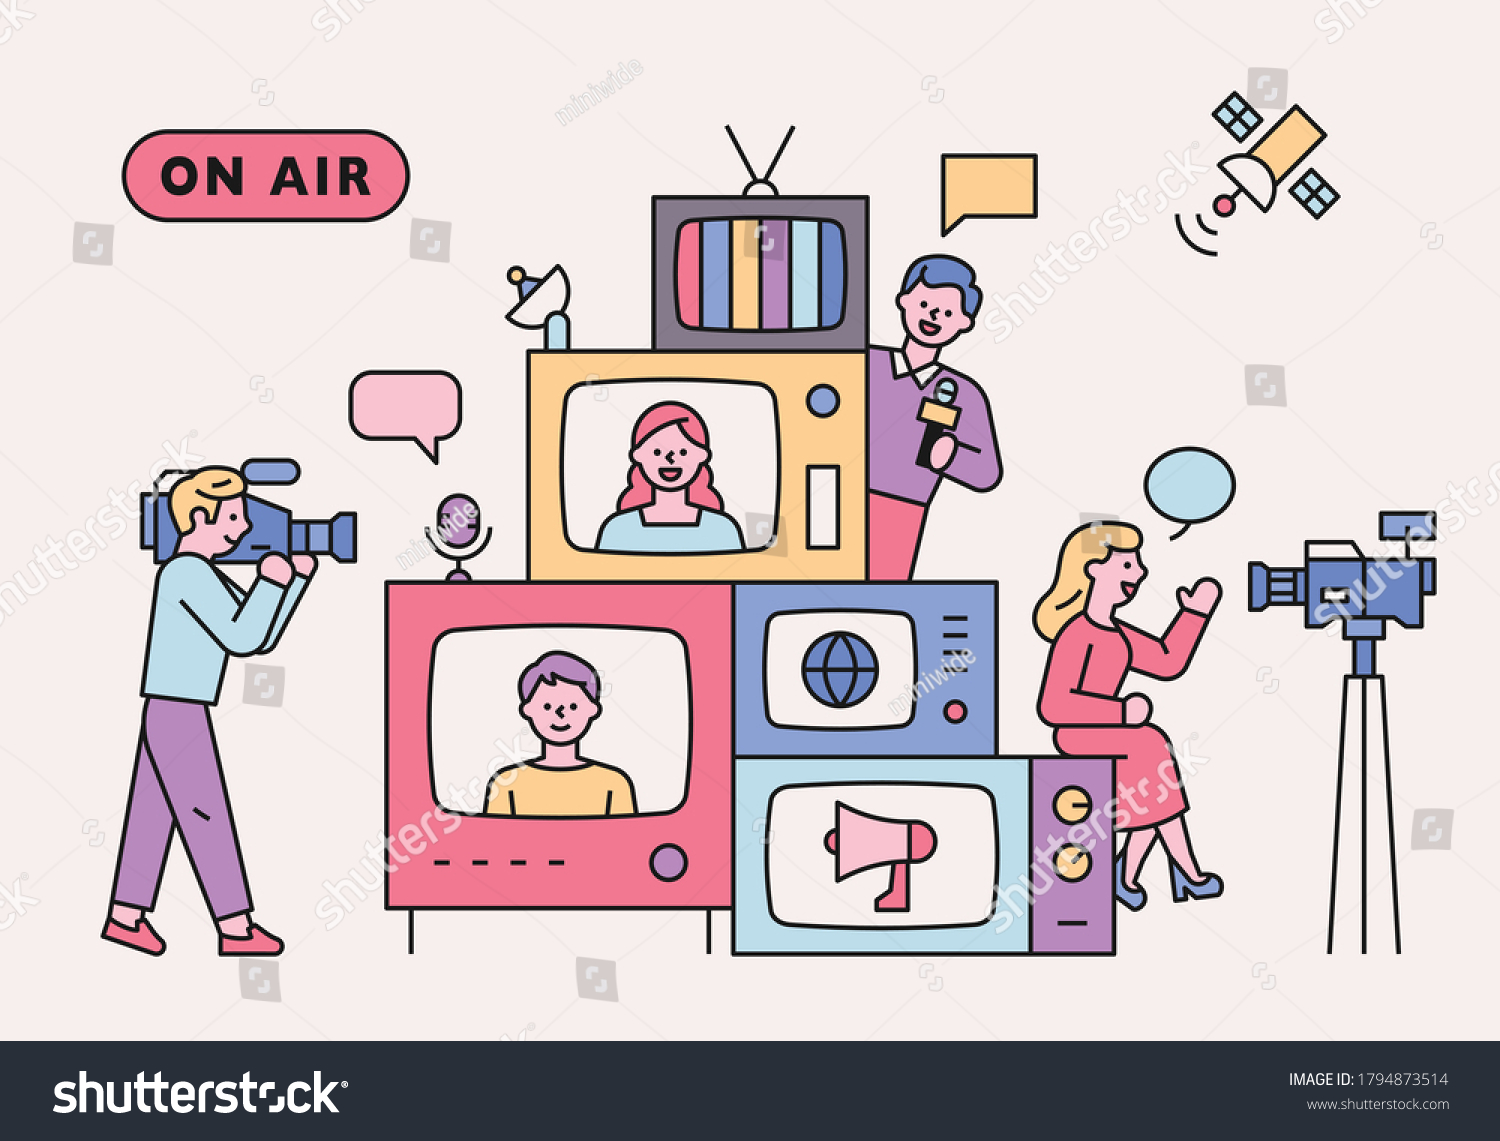 Retro televisions are piled up. There are people around you who report news. flat design style minimal vector illustration. #1794873514